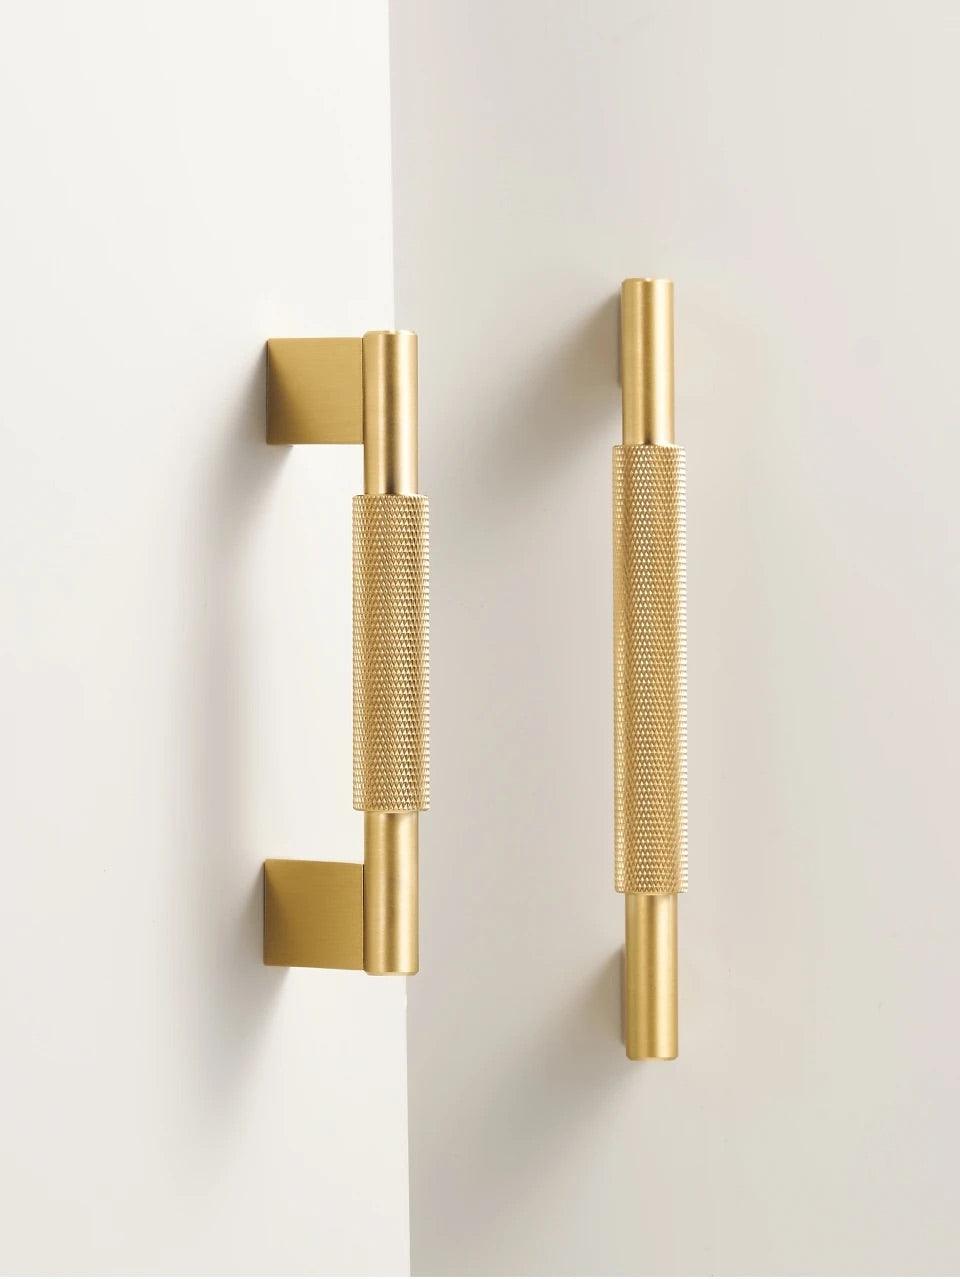 LACIE / Solid Brass Knurled Handles - Handle Shop Couture 